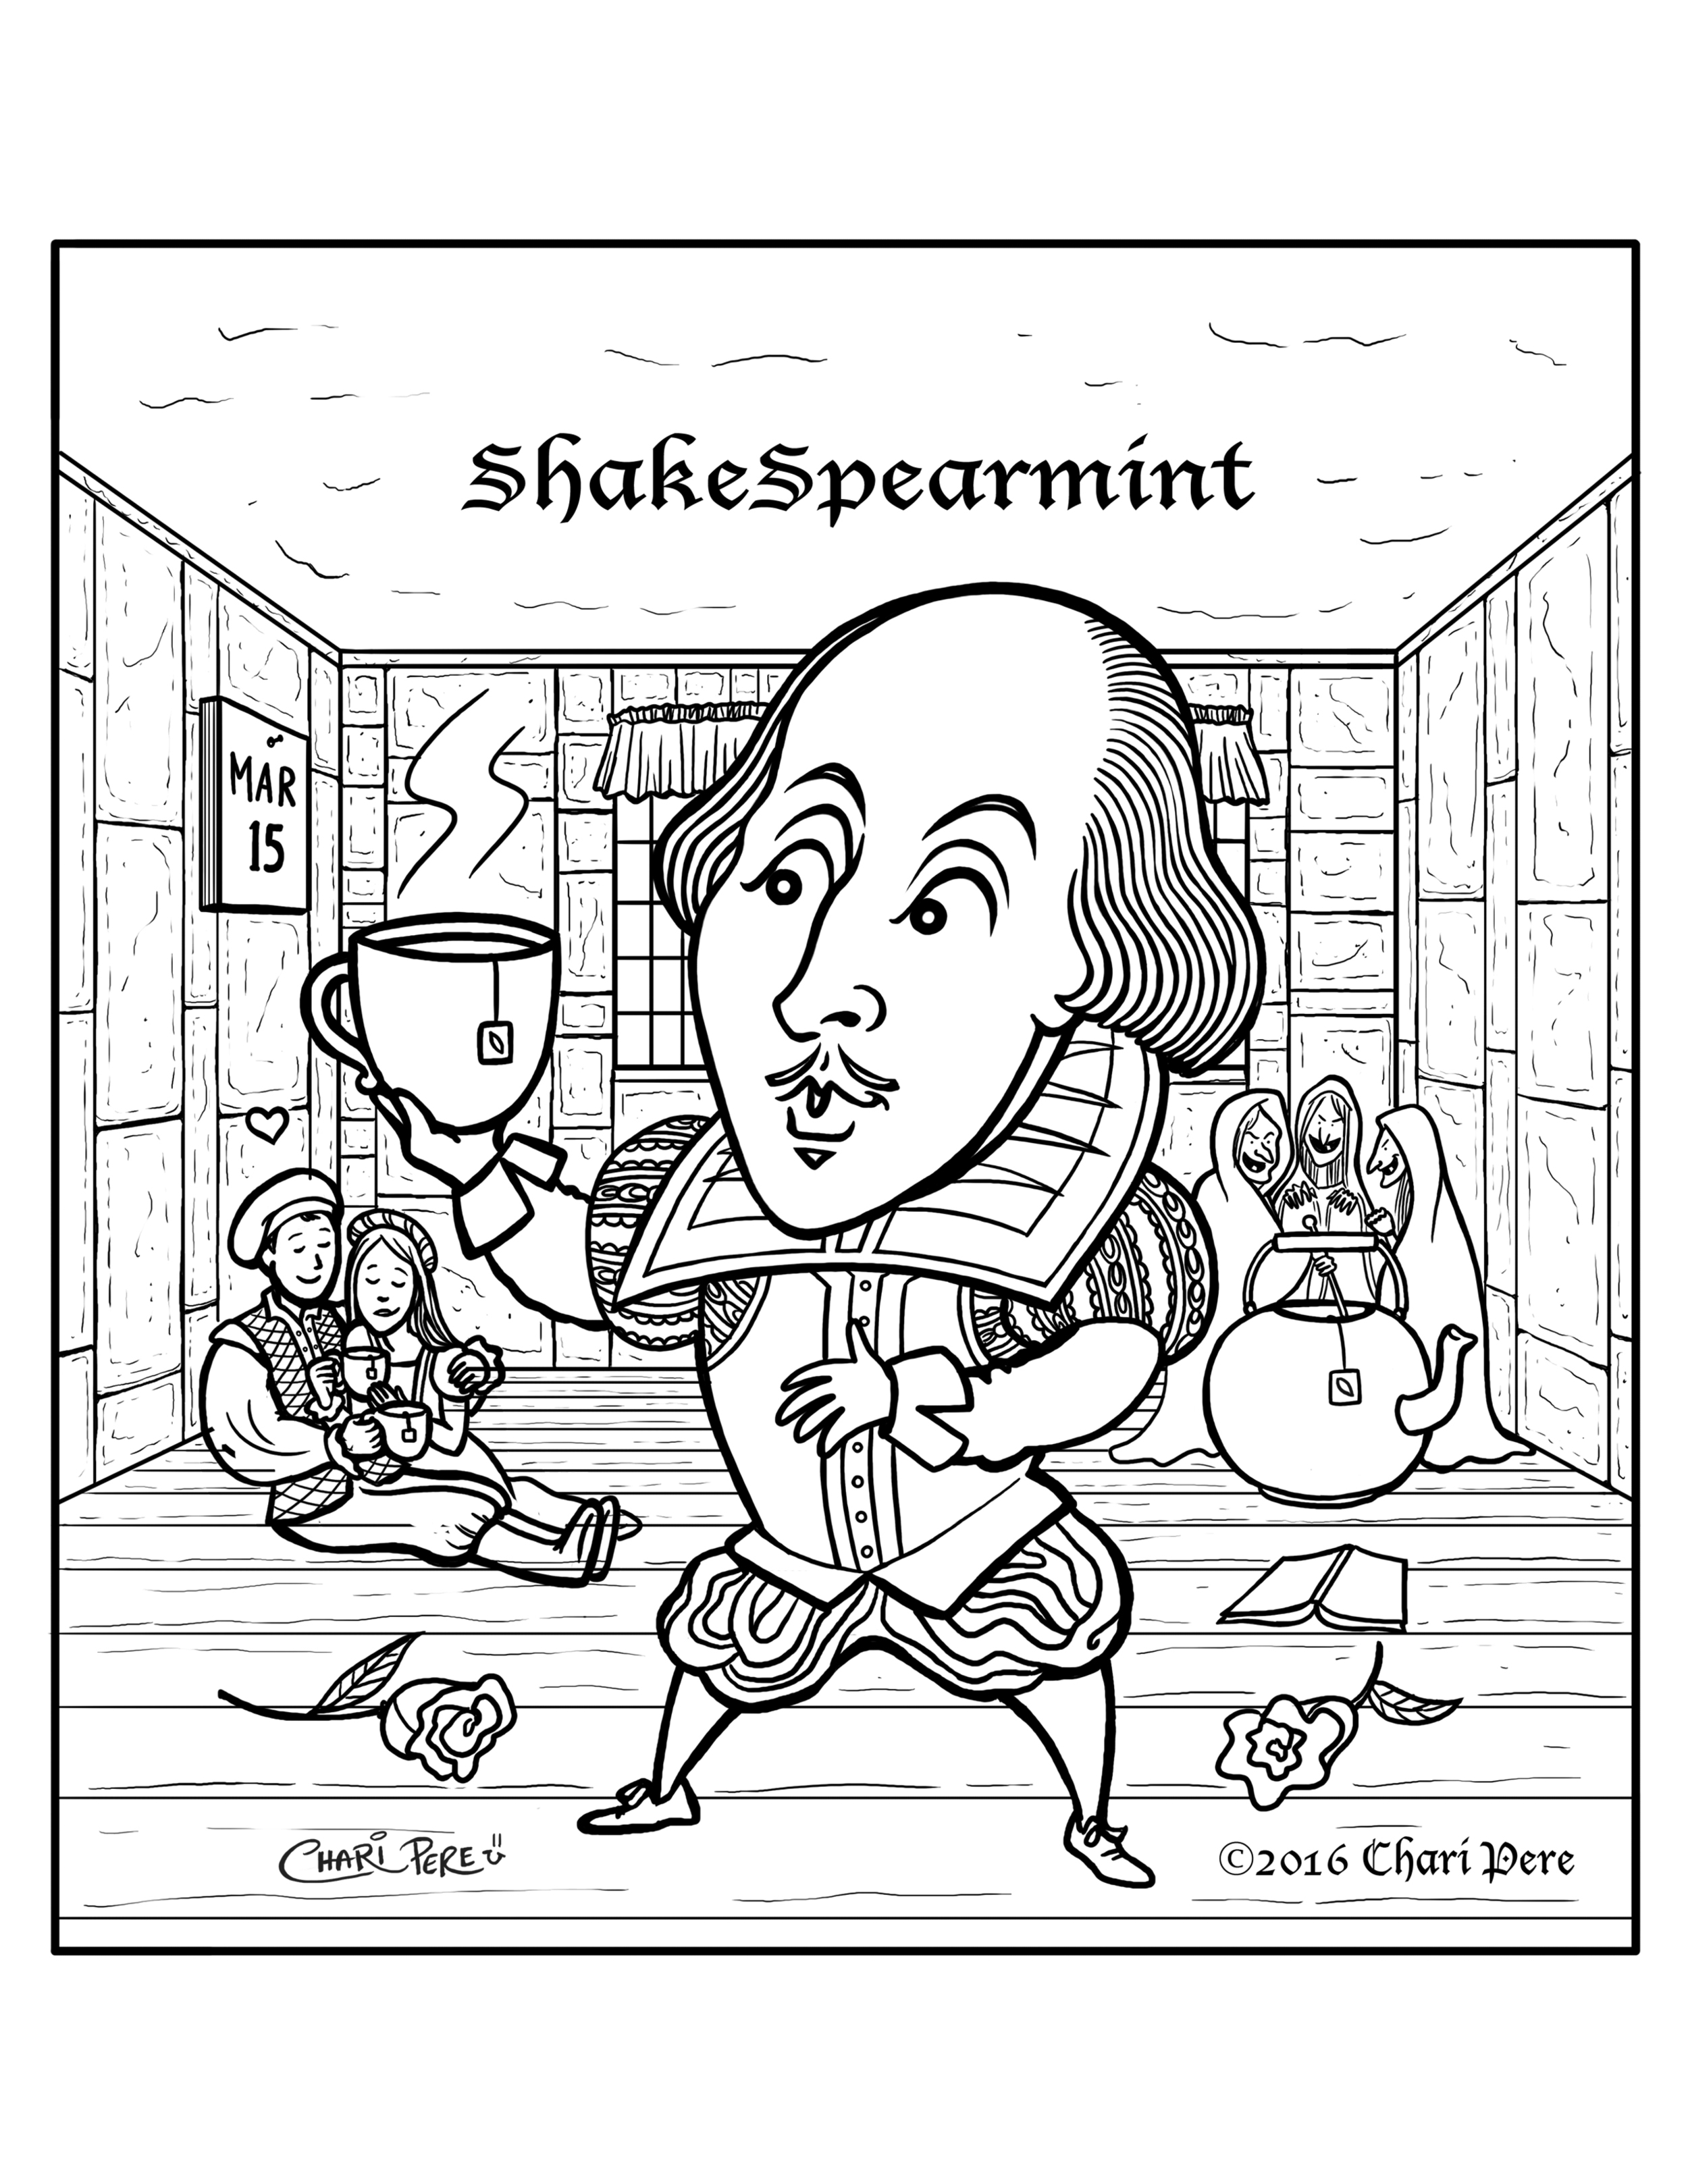 ShakeSpearmint Coloring Page for The TeaBook